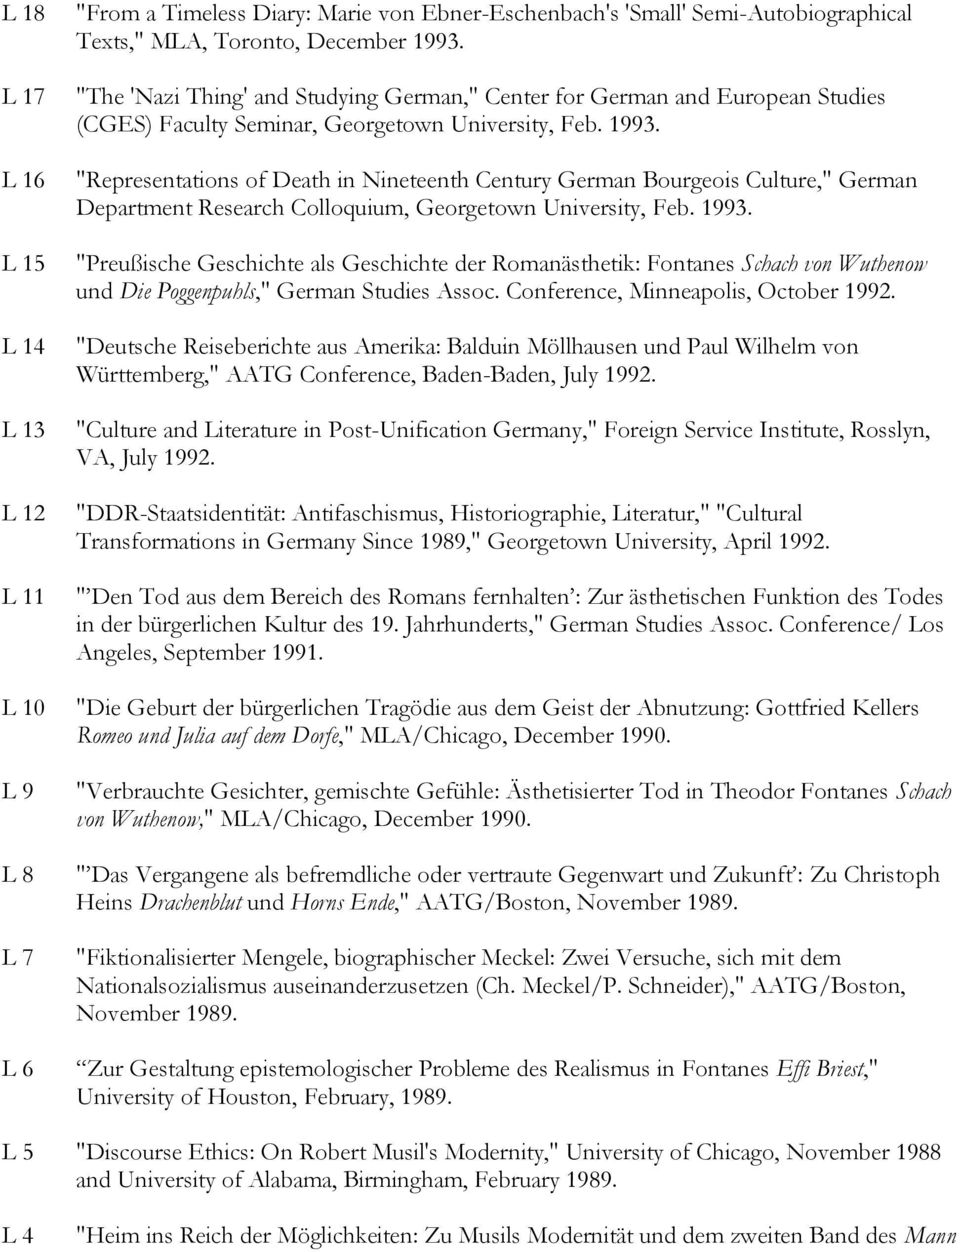 "Representations of Death in Nineteenth Century German Bourgeois Culture," German Department Research Colloquium, Georgetown University, Feb. 1993.